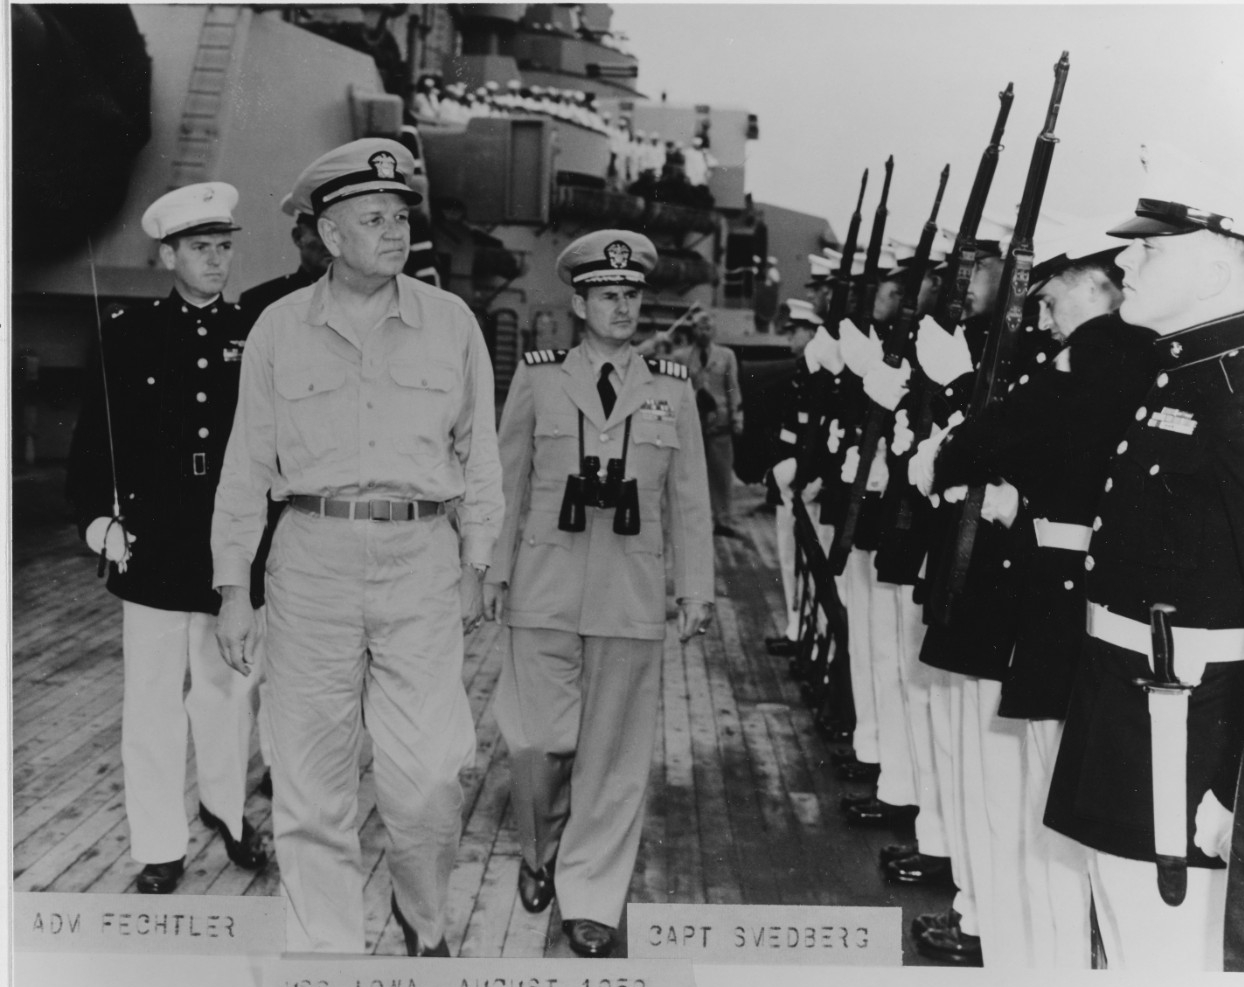 Admiral Fechteler is escorted by Captain William R. Smedberg III, while inspecting Marines aboard the USS Iowa in August 1952, off Wonsan, Korea.